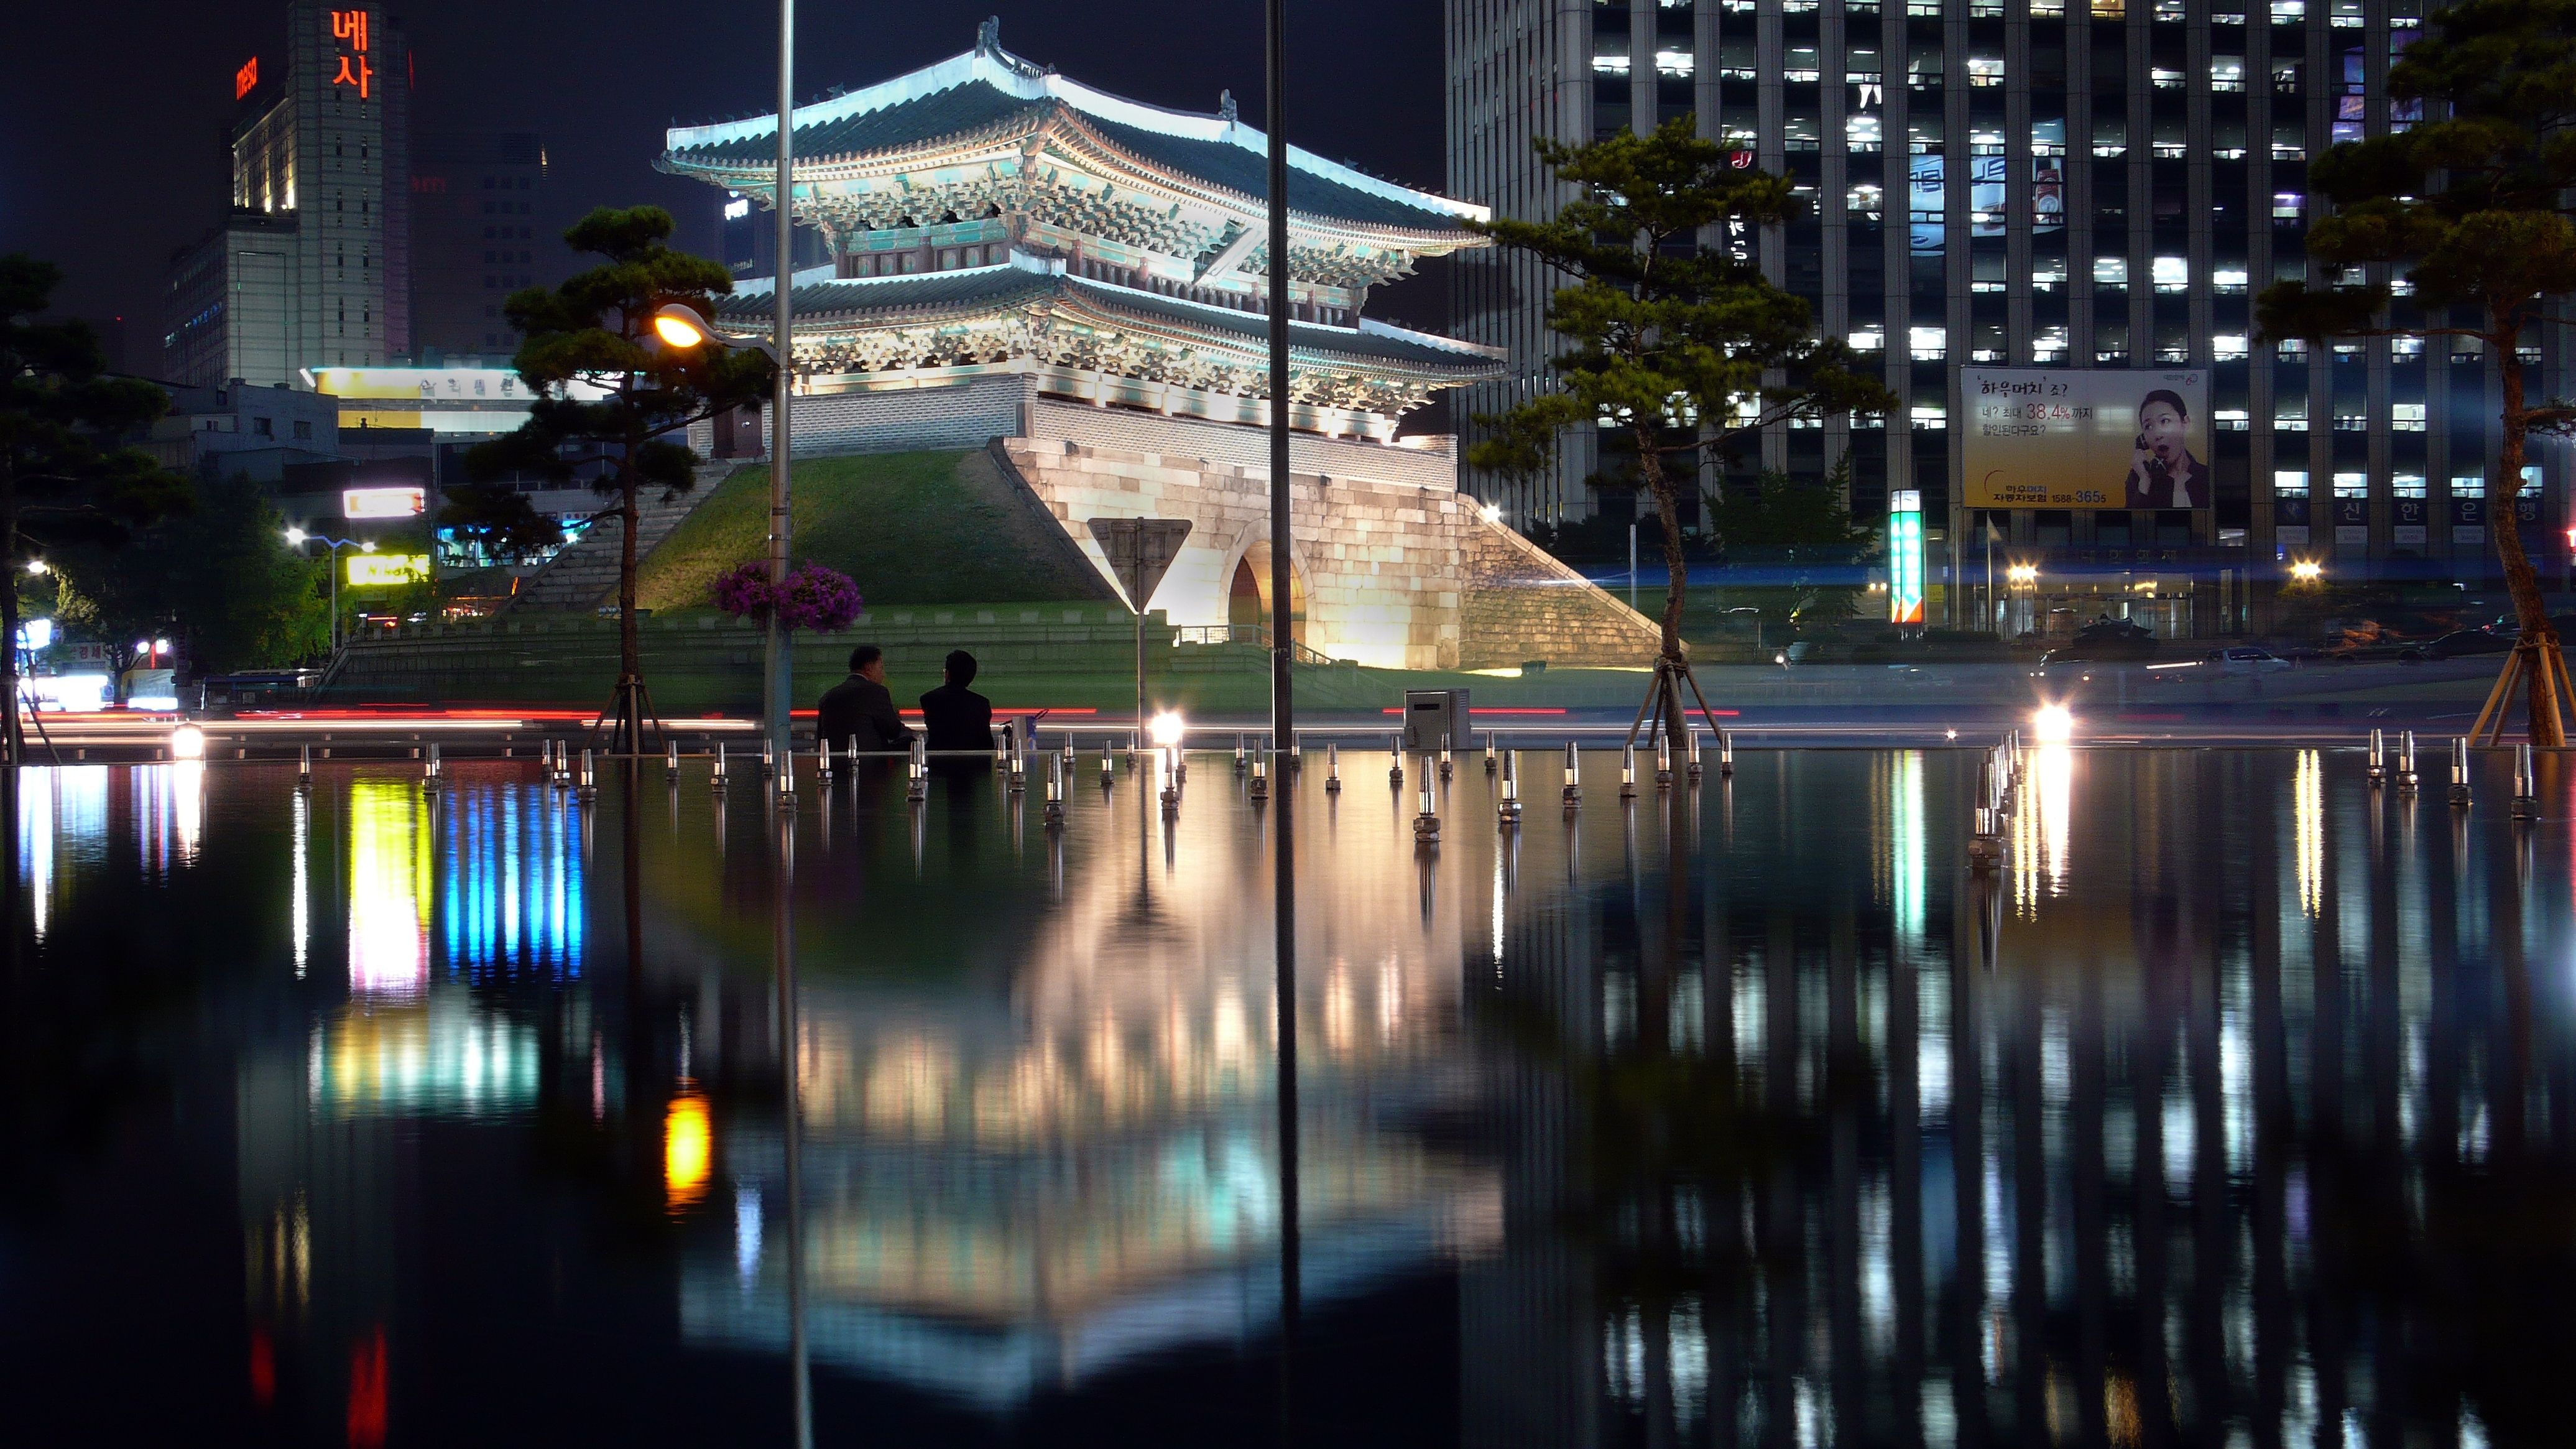 A reflection of buildings in water at night - Seoul